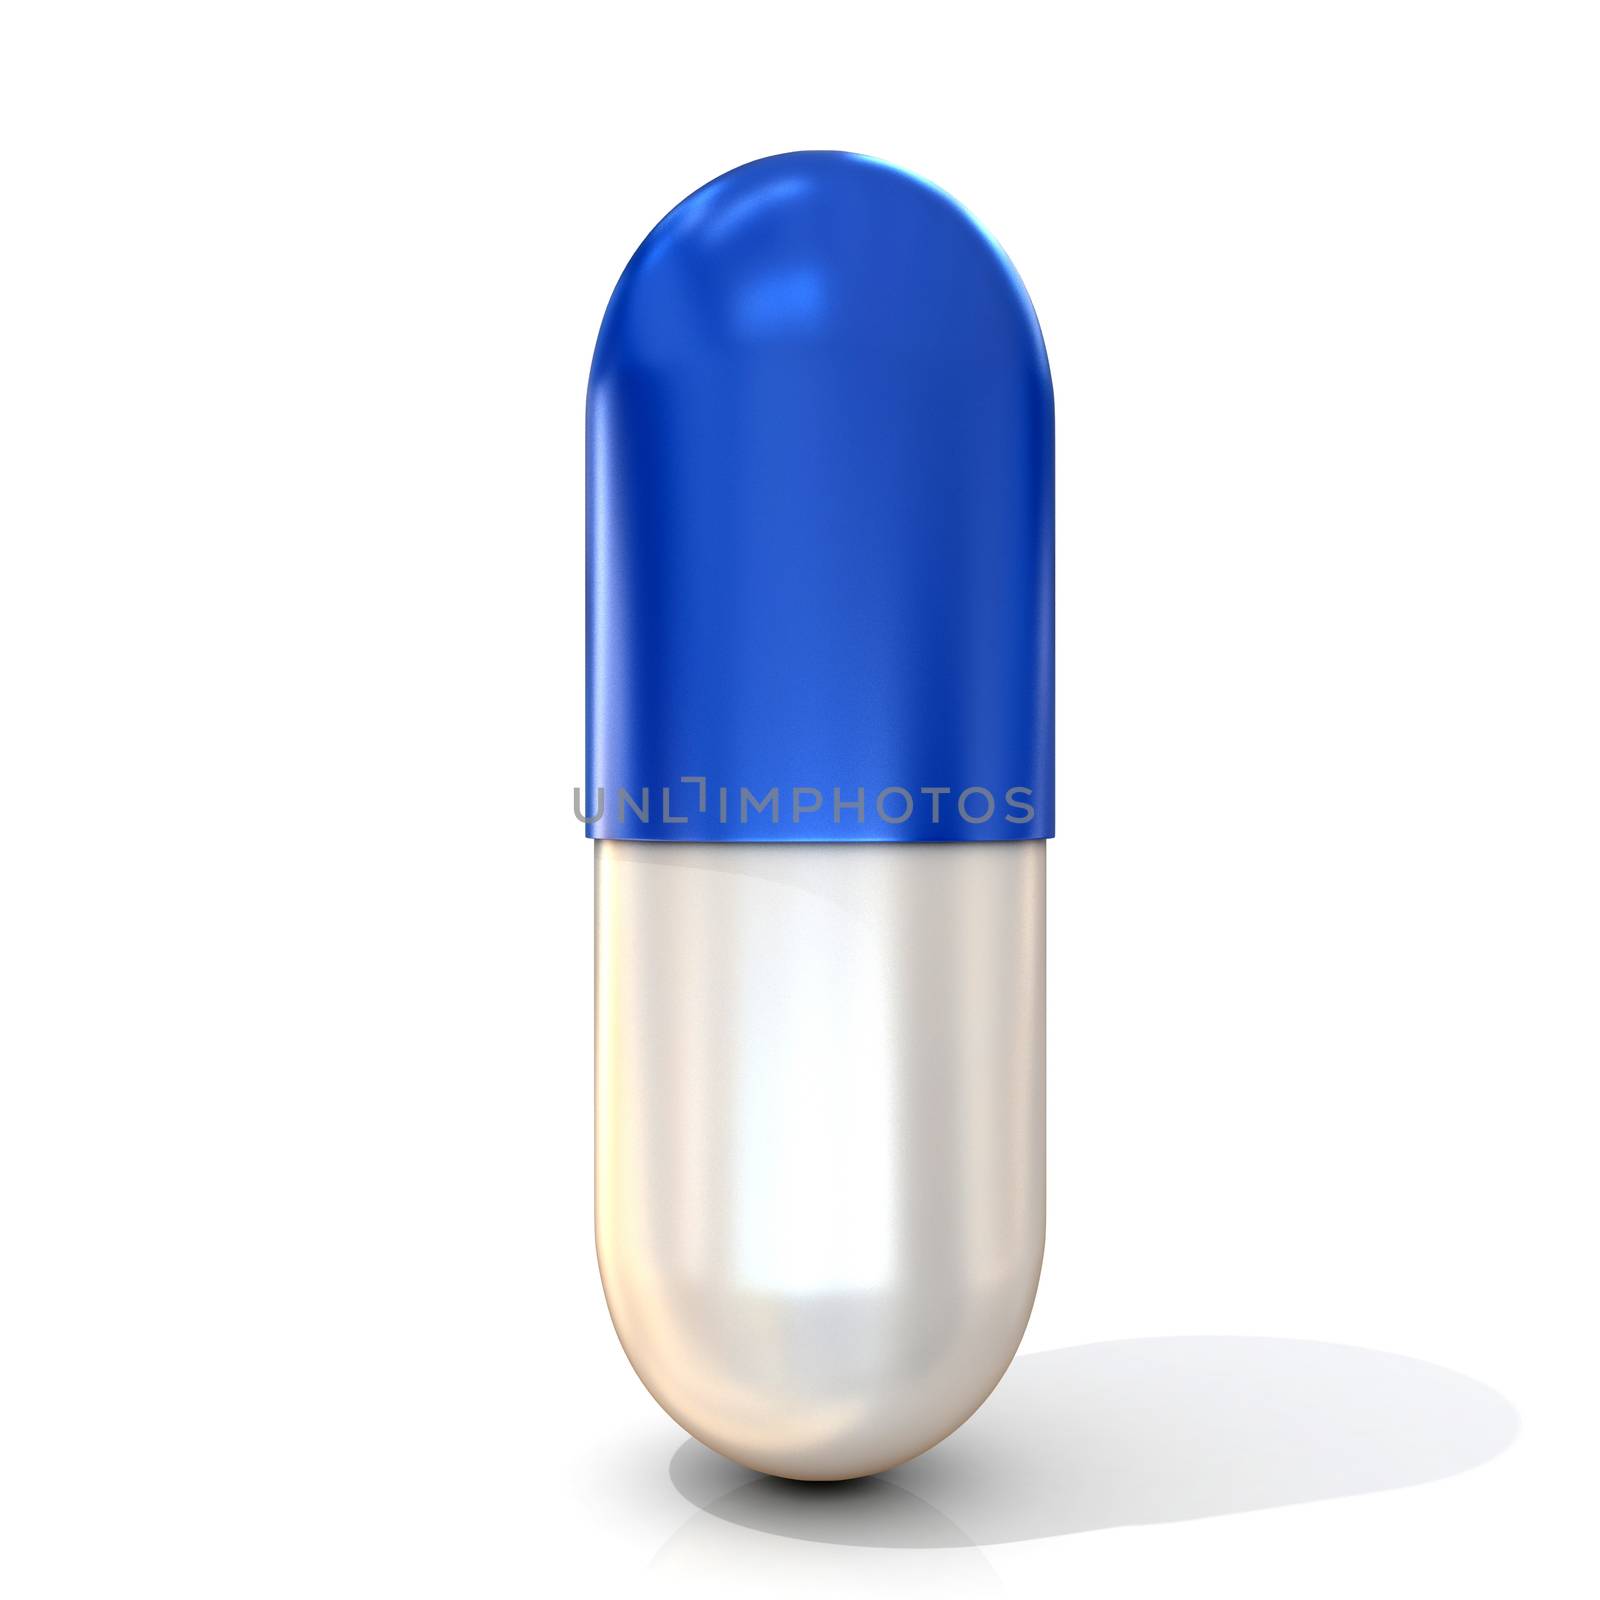 Blue pill capsule, isolated on white background